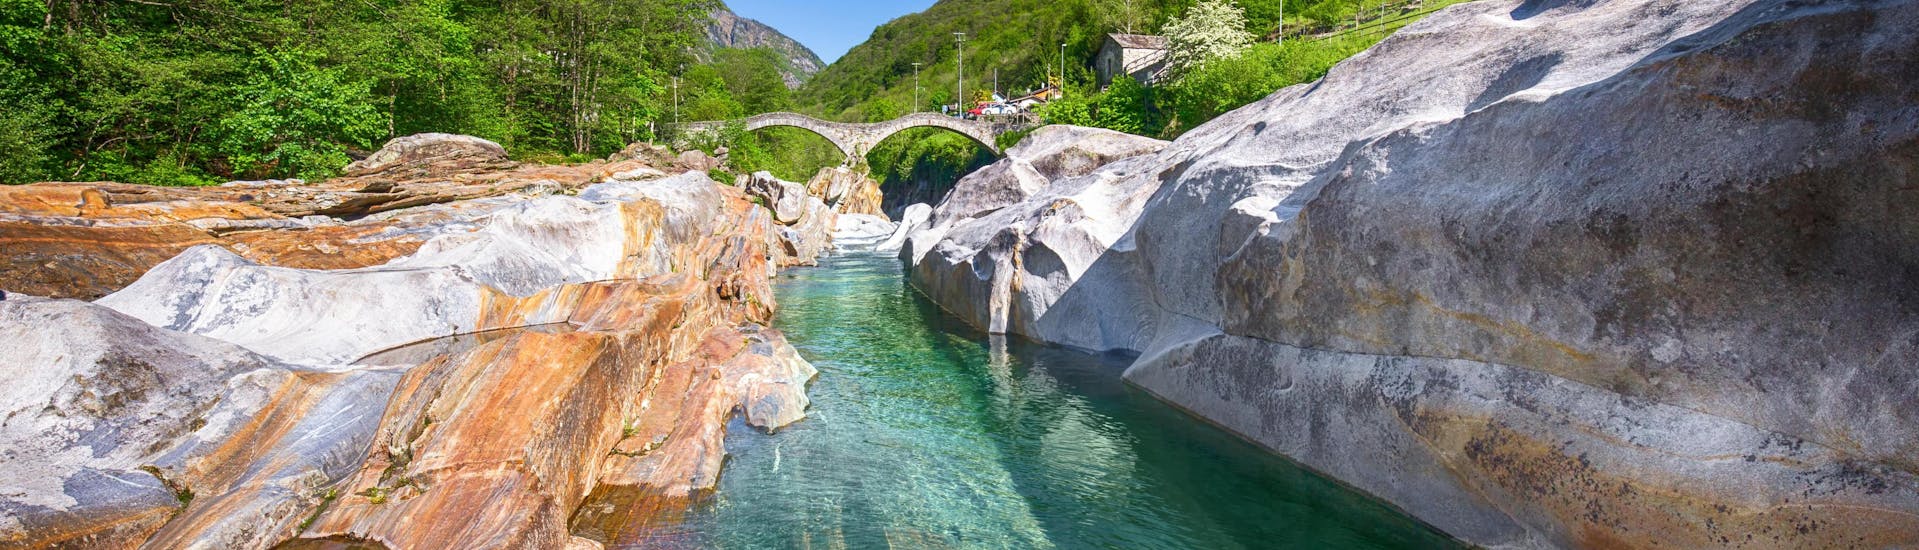 An image of a crystal clear stream flowing through the Verzasca Valley, a popular destination to go canyoning in Ticino.